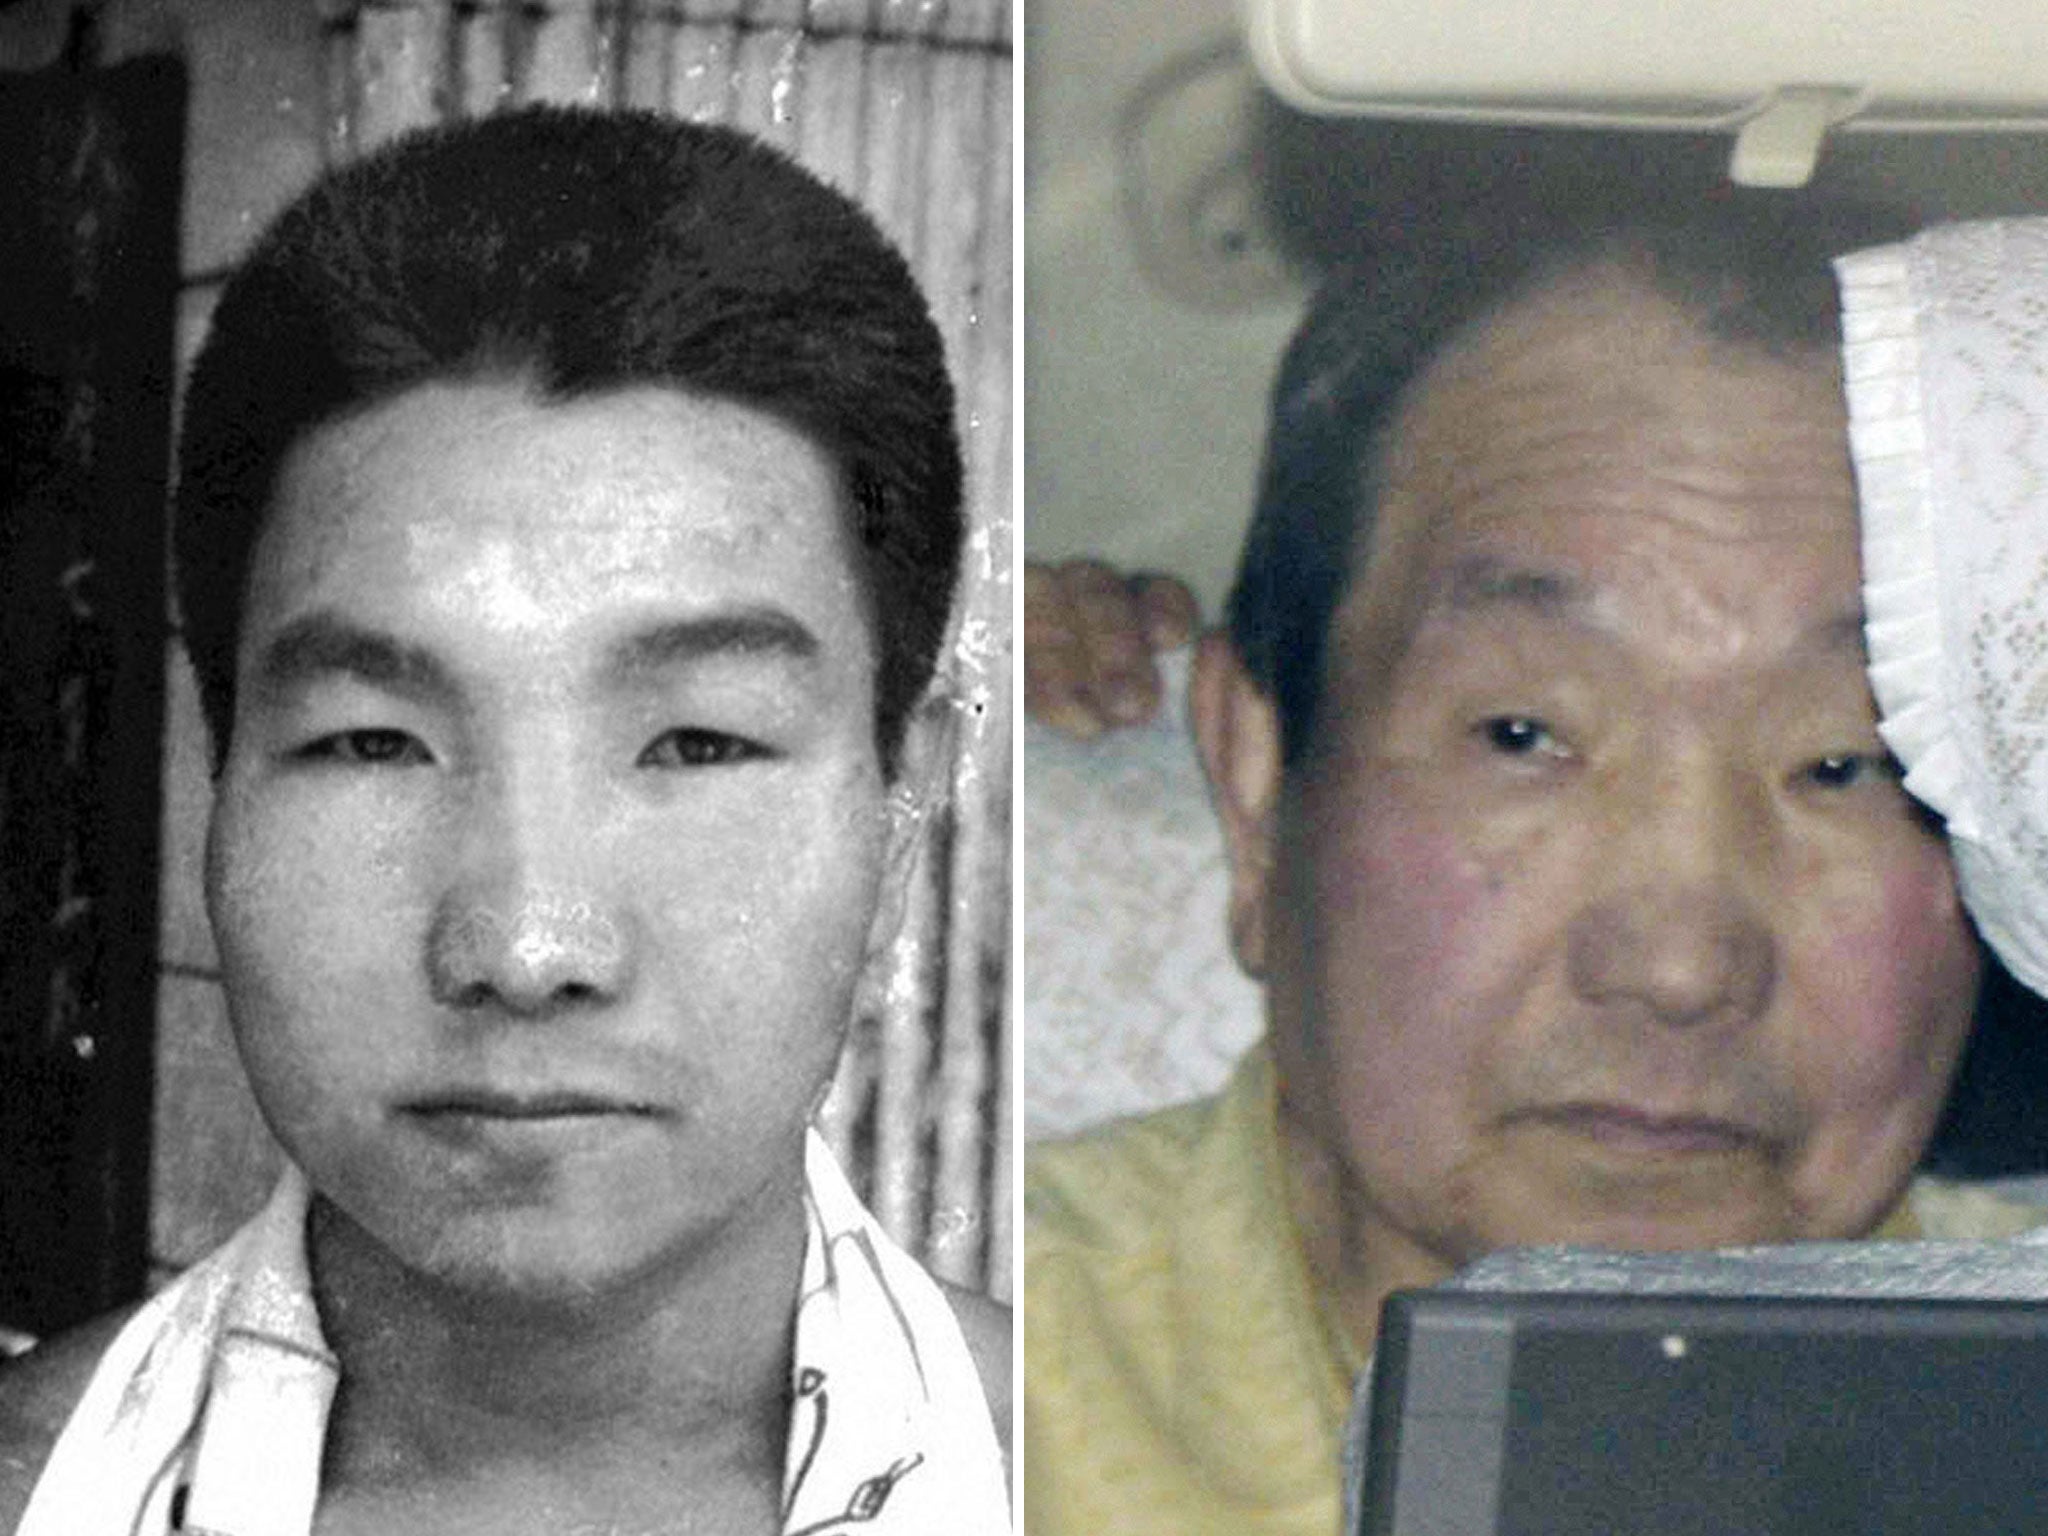 Iwao Hakamada before he was imprisoned in 1966 and now, aged 78 just after his release from death row